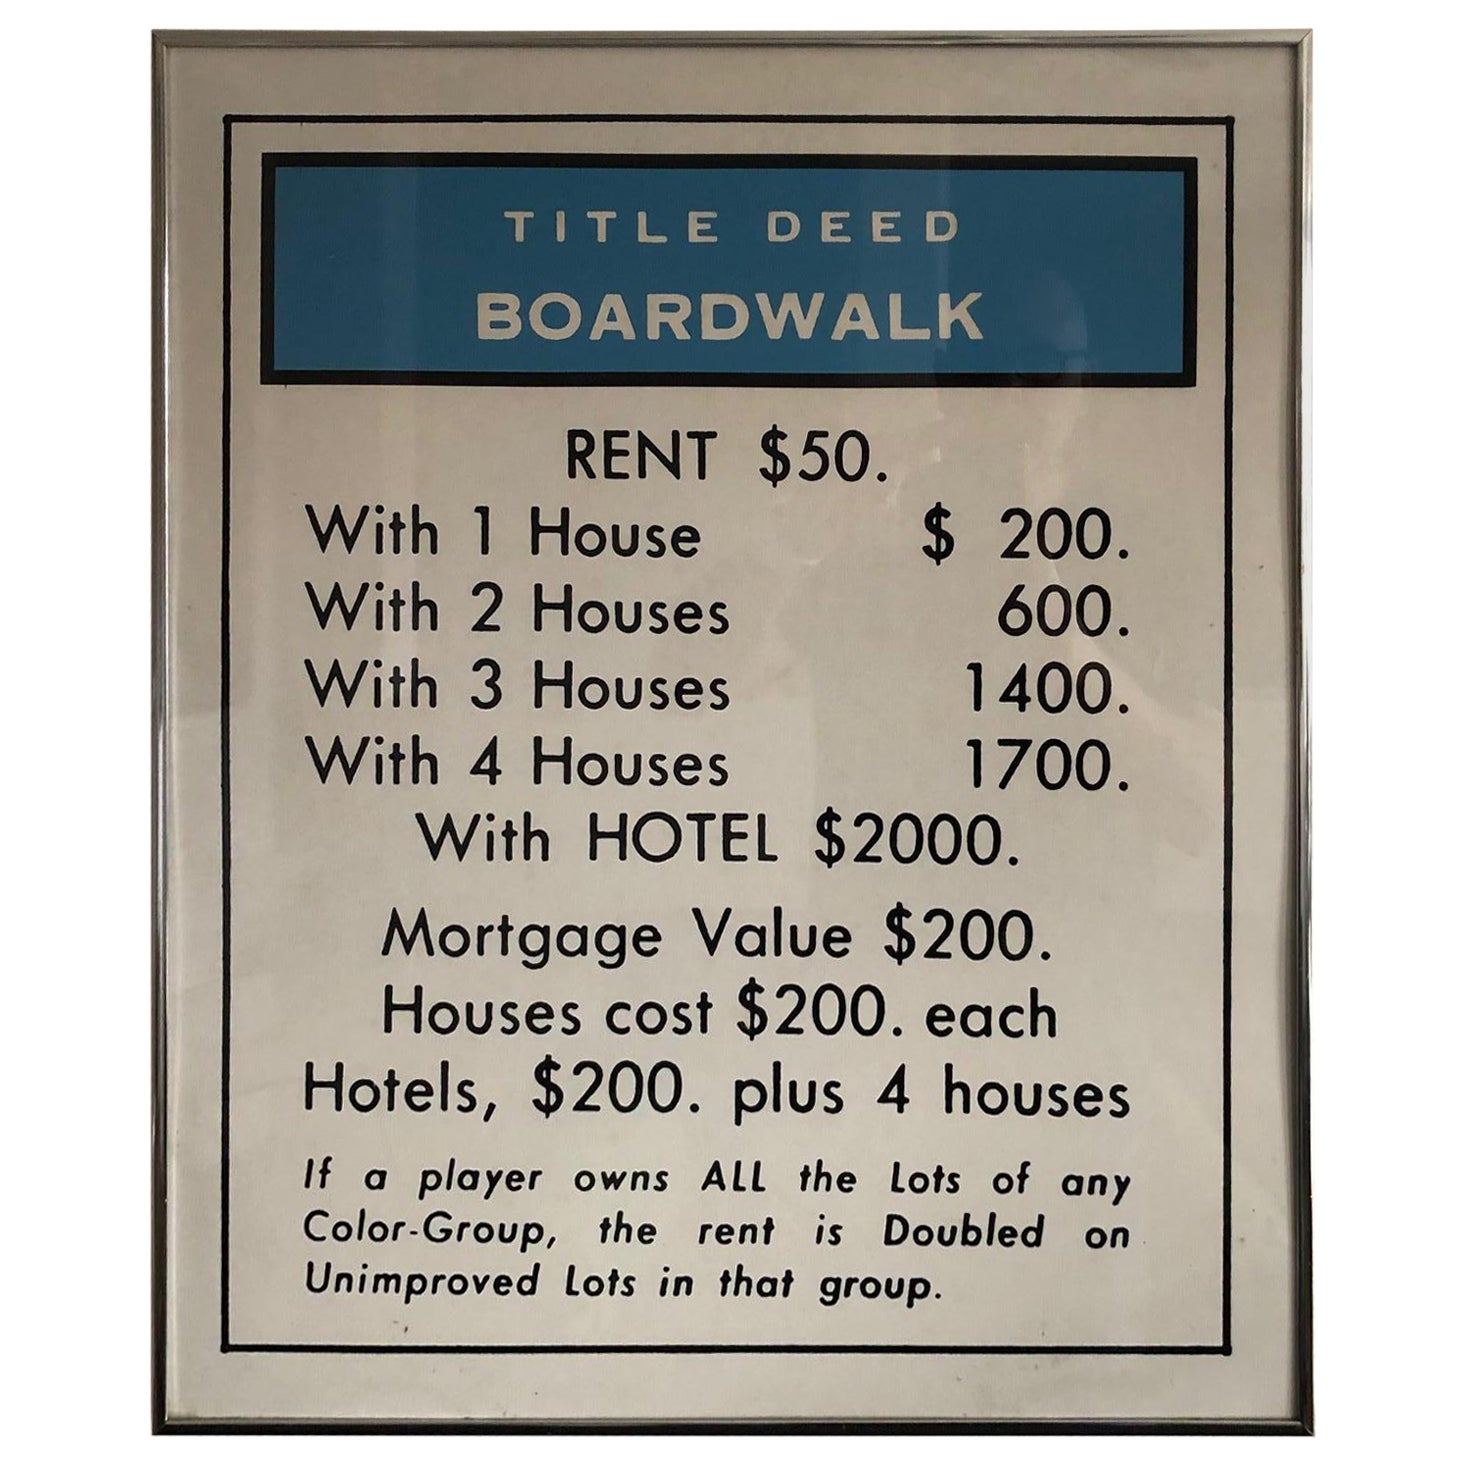 Vintage Monopoly Boardwalk Title Deed Lithograph at 1stDibs  boardwalk  card, park place monopoly card, boardwalk card in monopoly